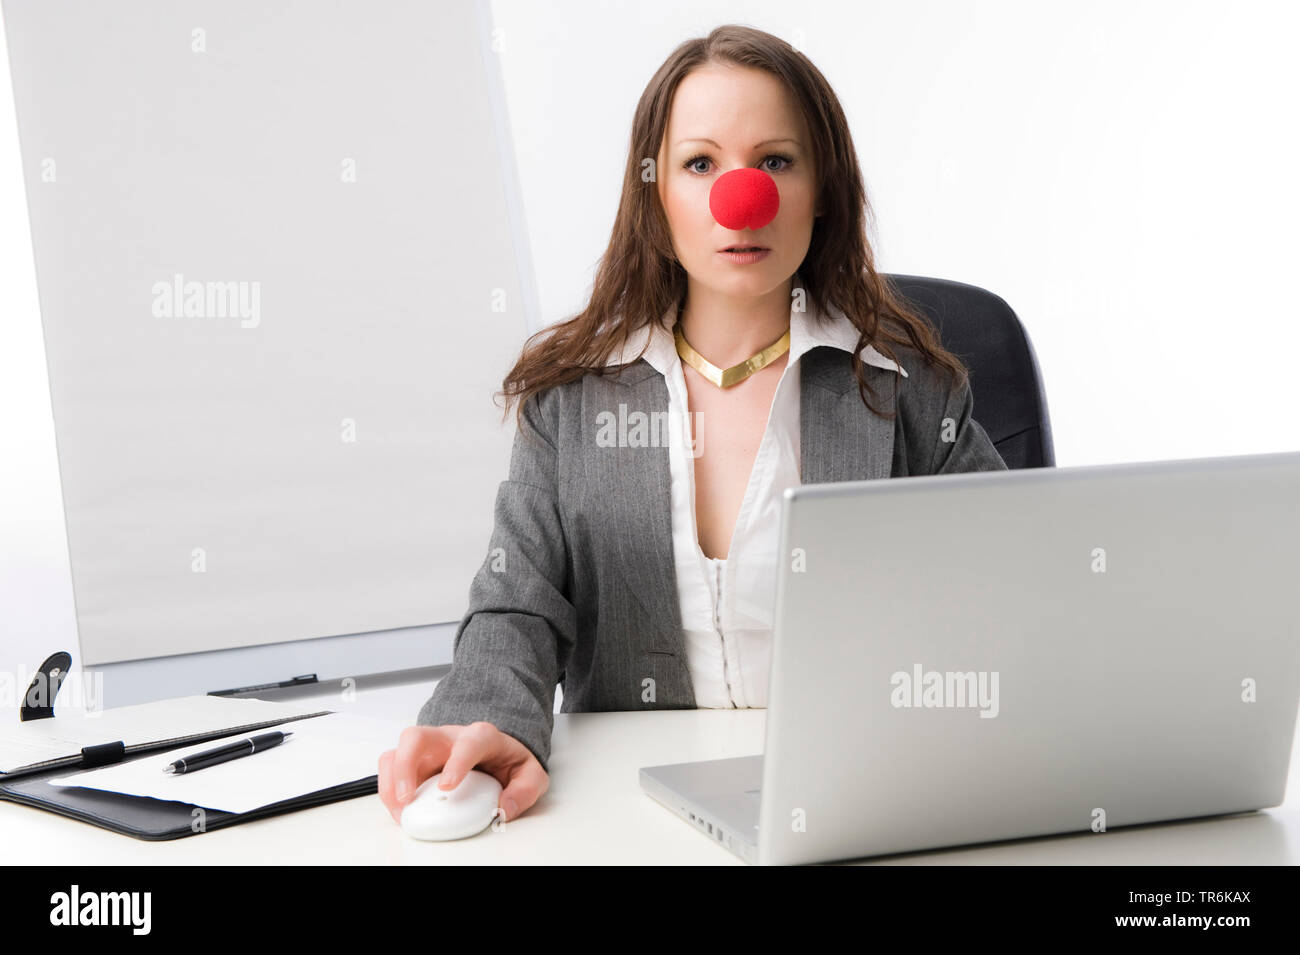 Female as business woman with fake nose Stock Photo - Alamy